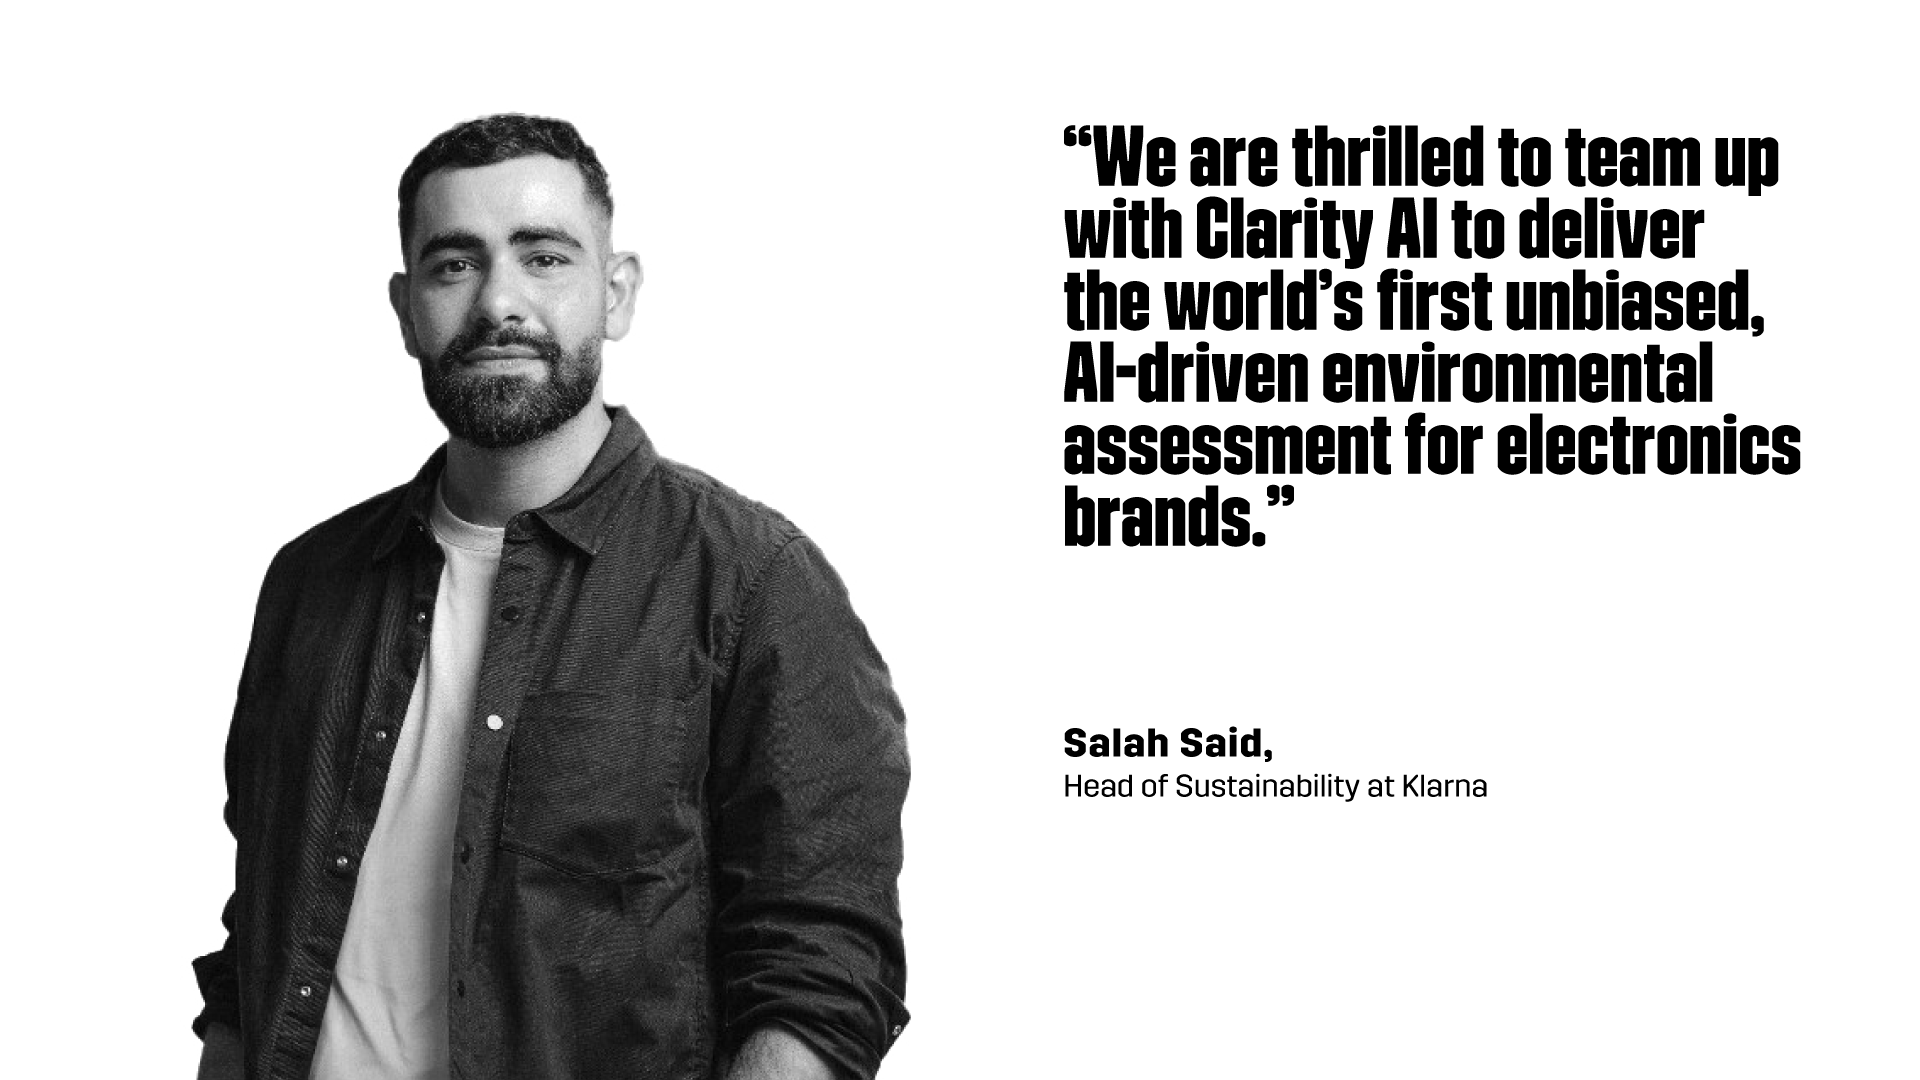 “We are thrilled to team up with Clarity AI to deliver the world’s first unbiased, AI-driven environmental assessment for electronics brands,” Salah Said, Head of Sustainability at Klarna